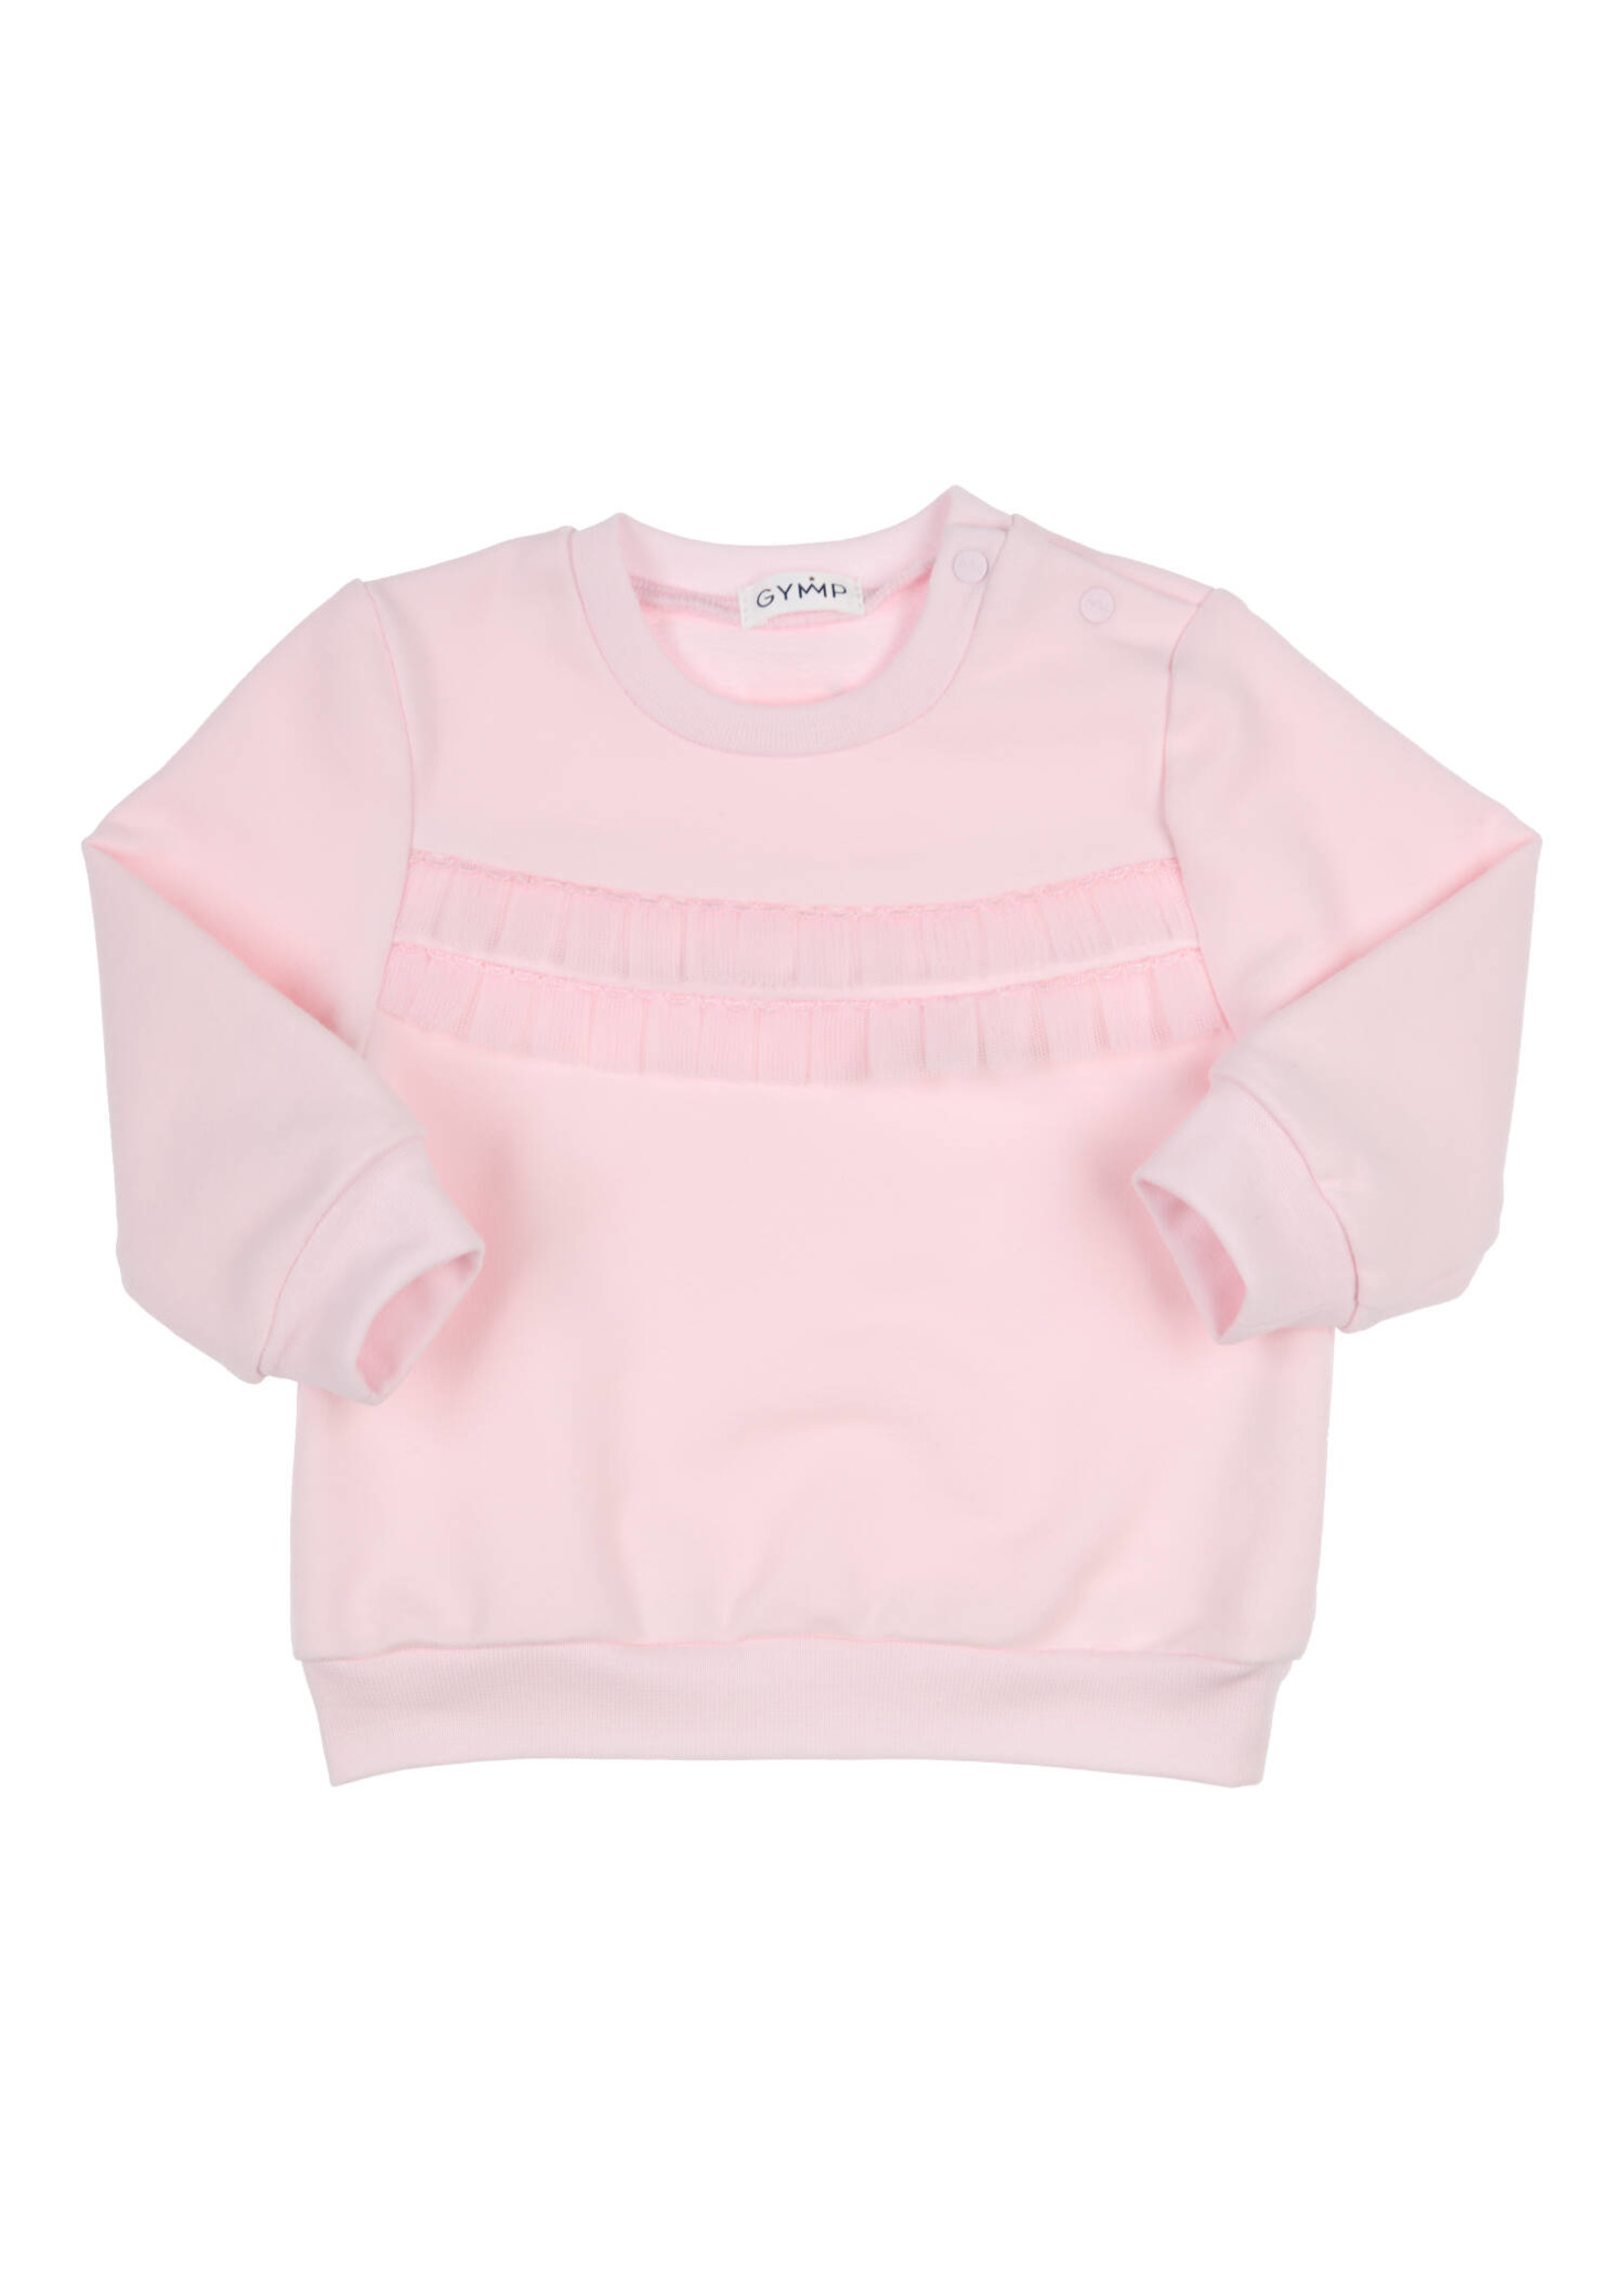 Gymp Sweater Carbon Light Pink 352-3226-10